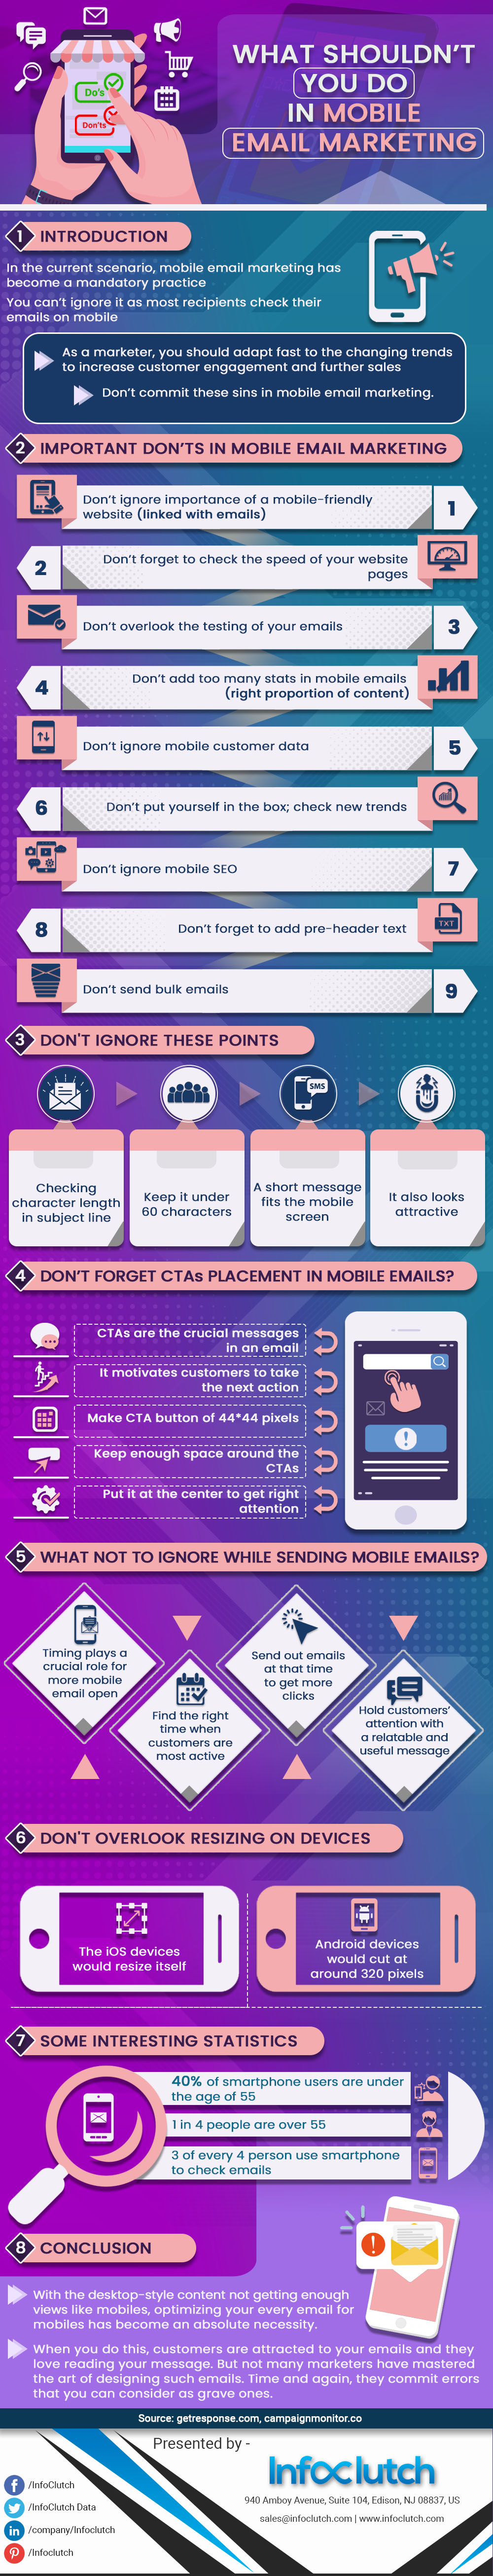 What Shouldn't Do In Mobile Email Marketing?